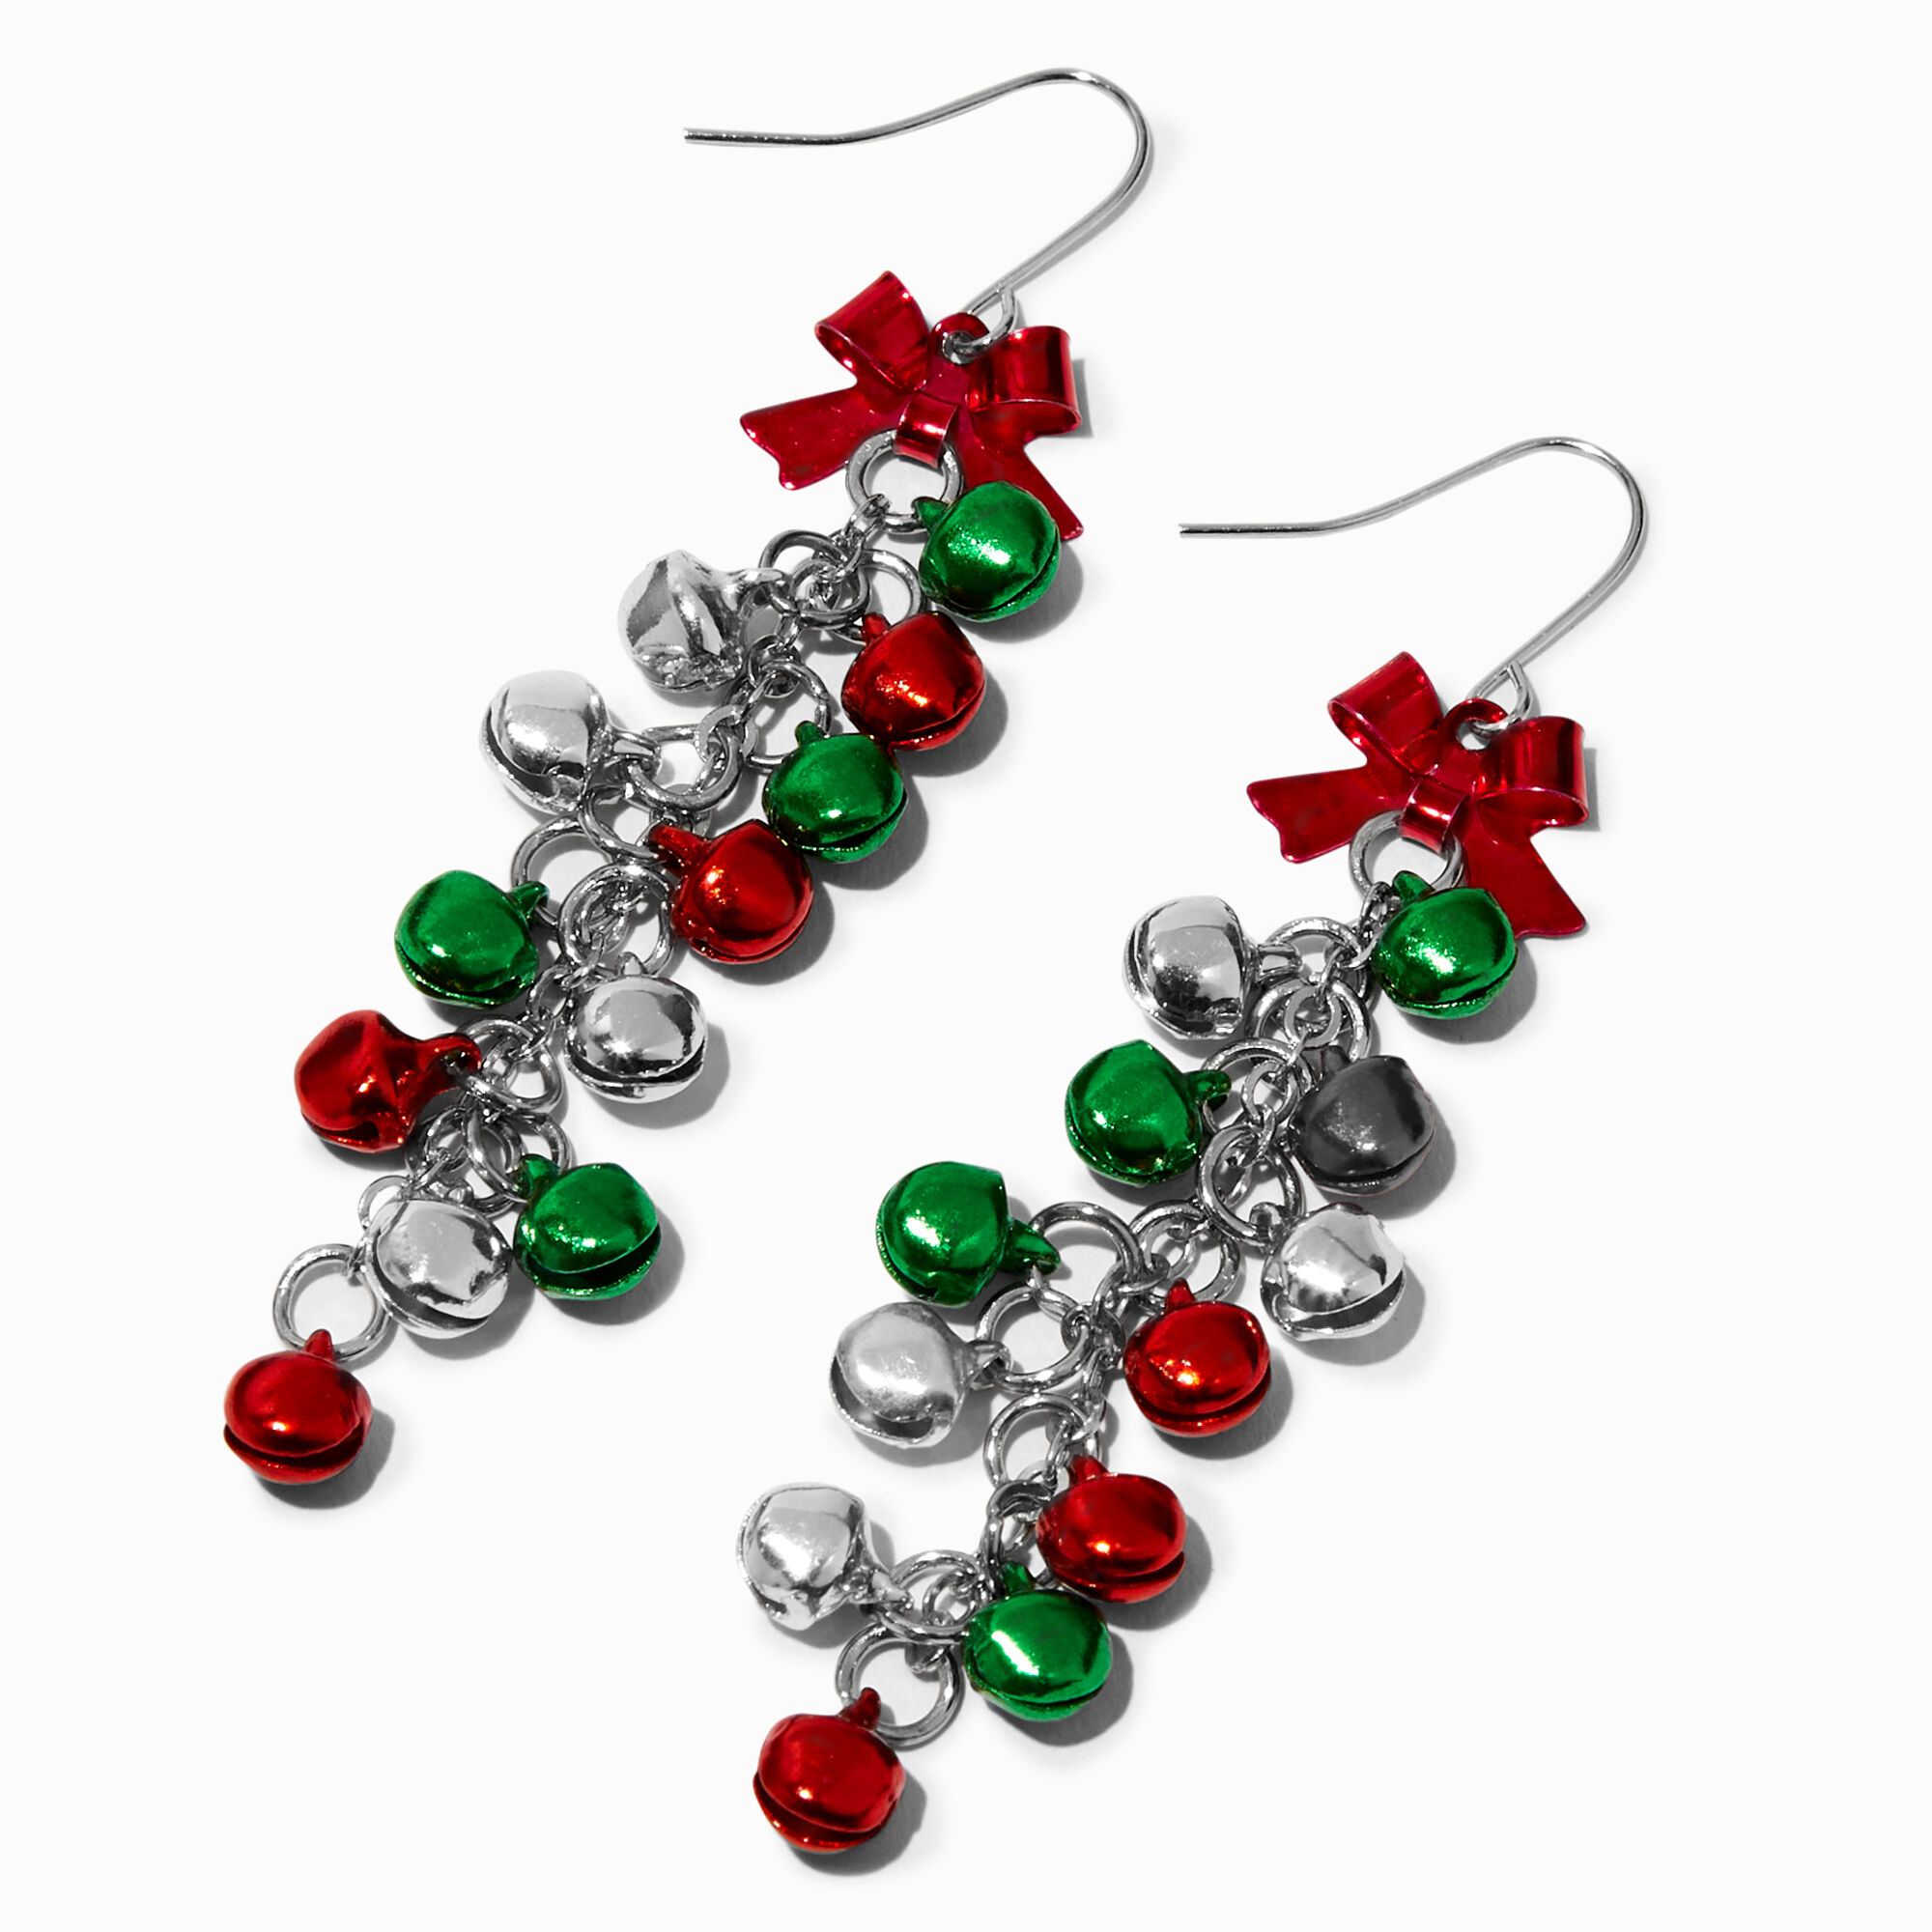 View Claires Jingle Bells 25 Linear Drop Earrings information